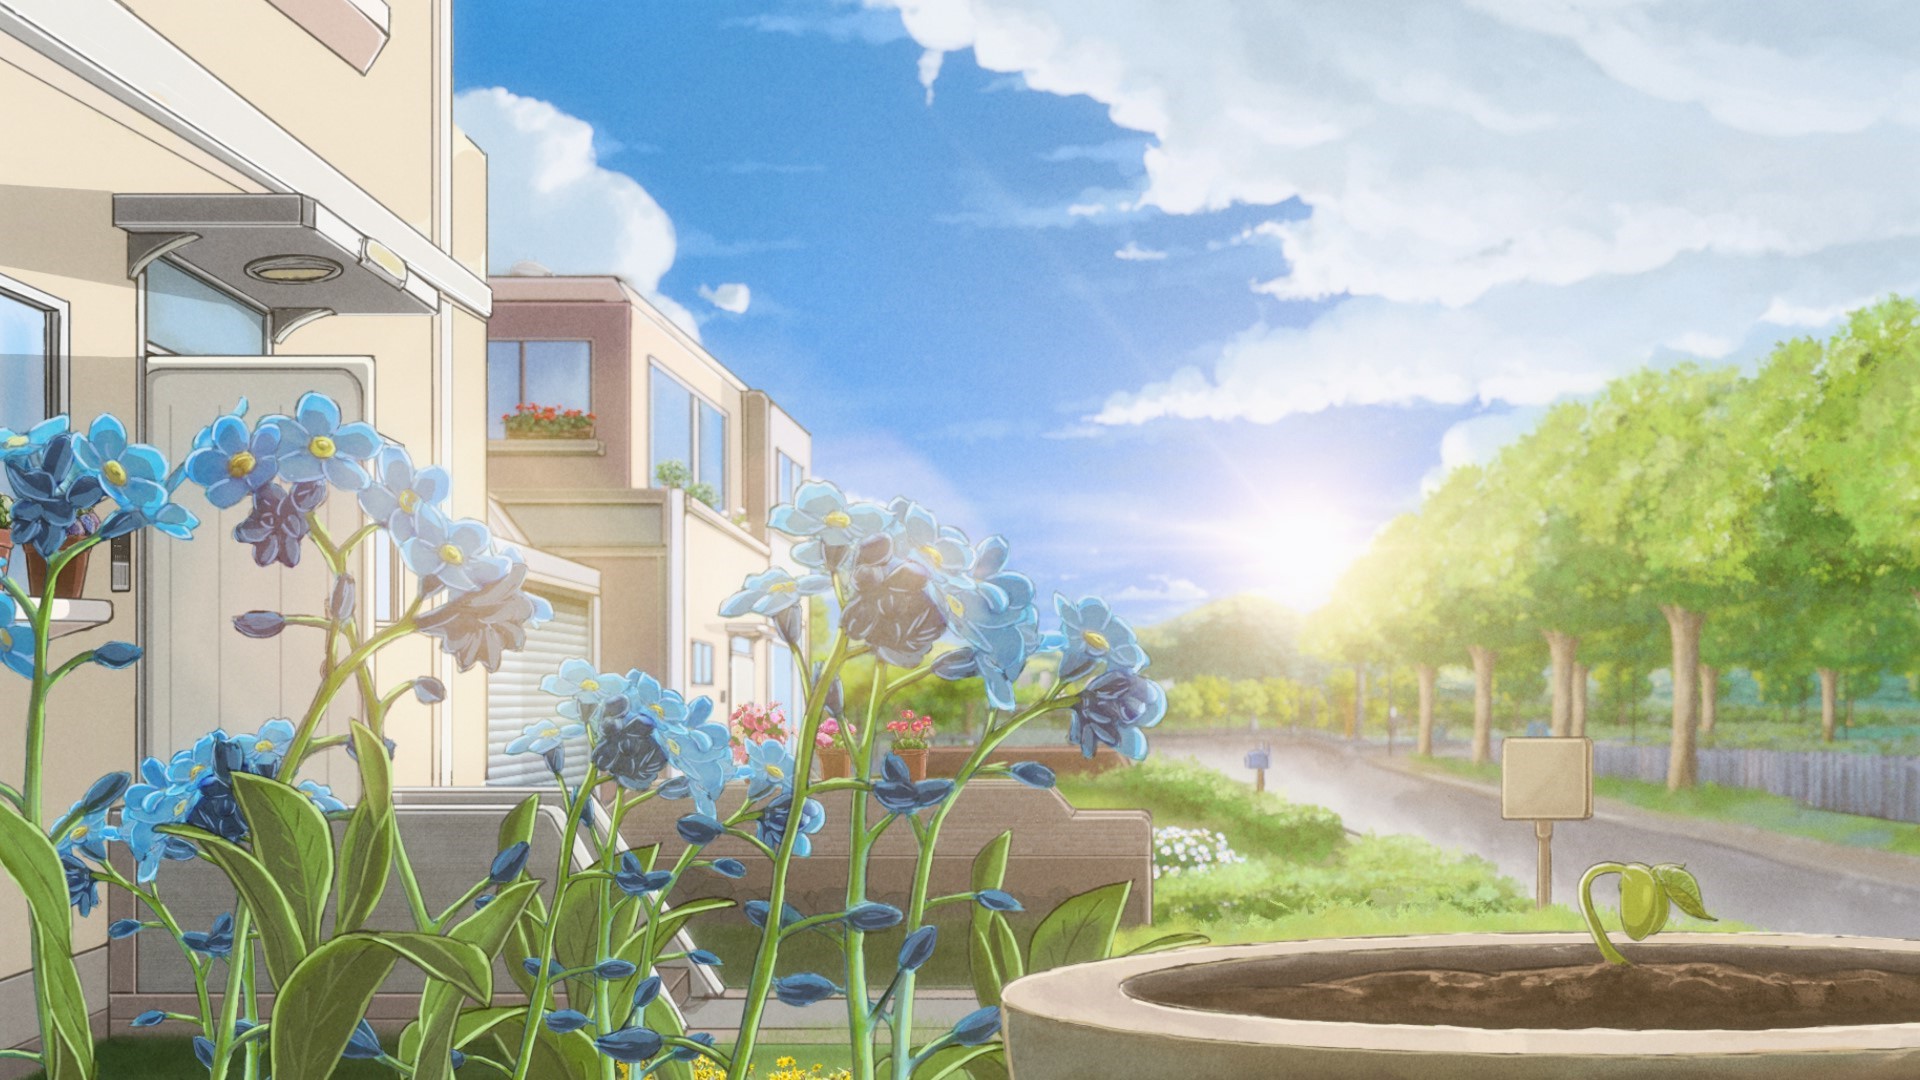 Anime 1920x1080 outdoors digital art morning grass nature plants flowers anime sky clouds outskirts